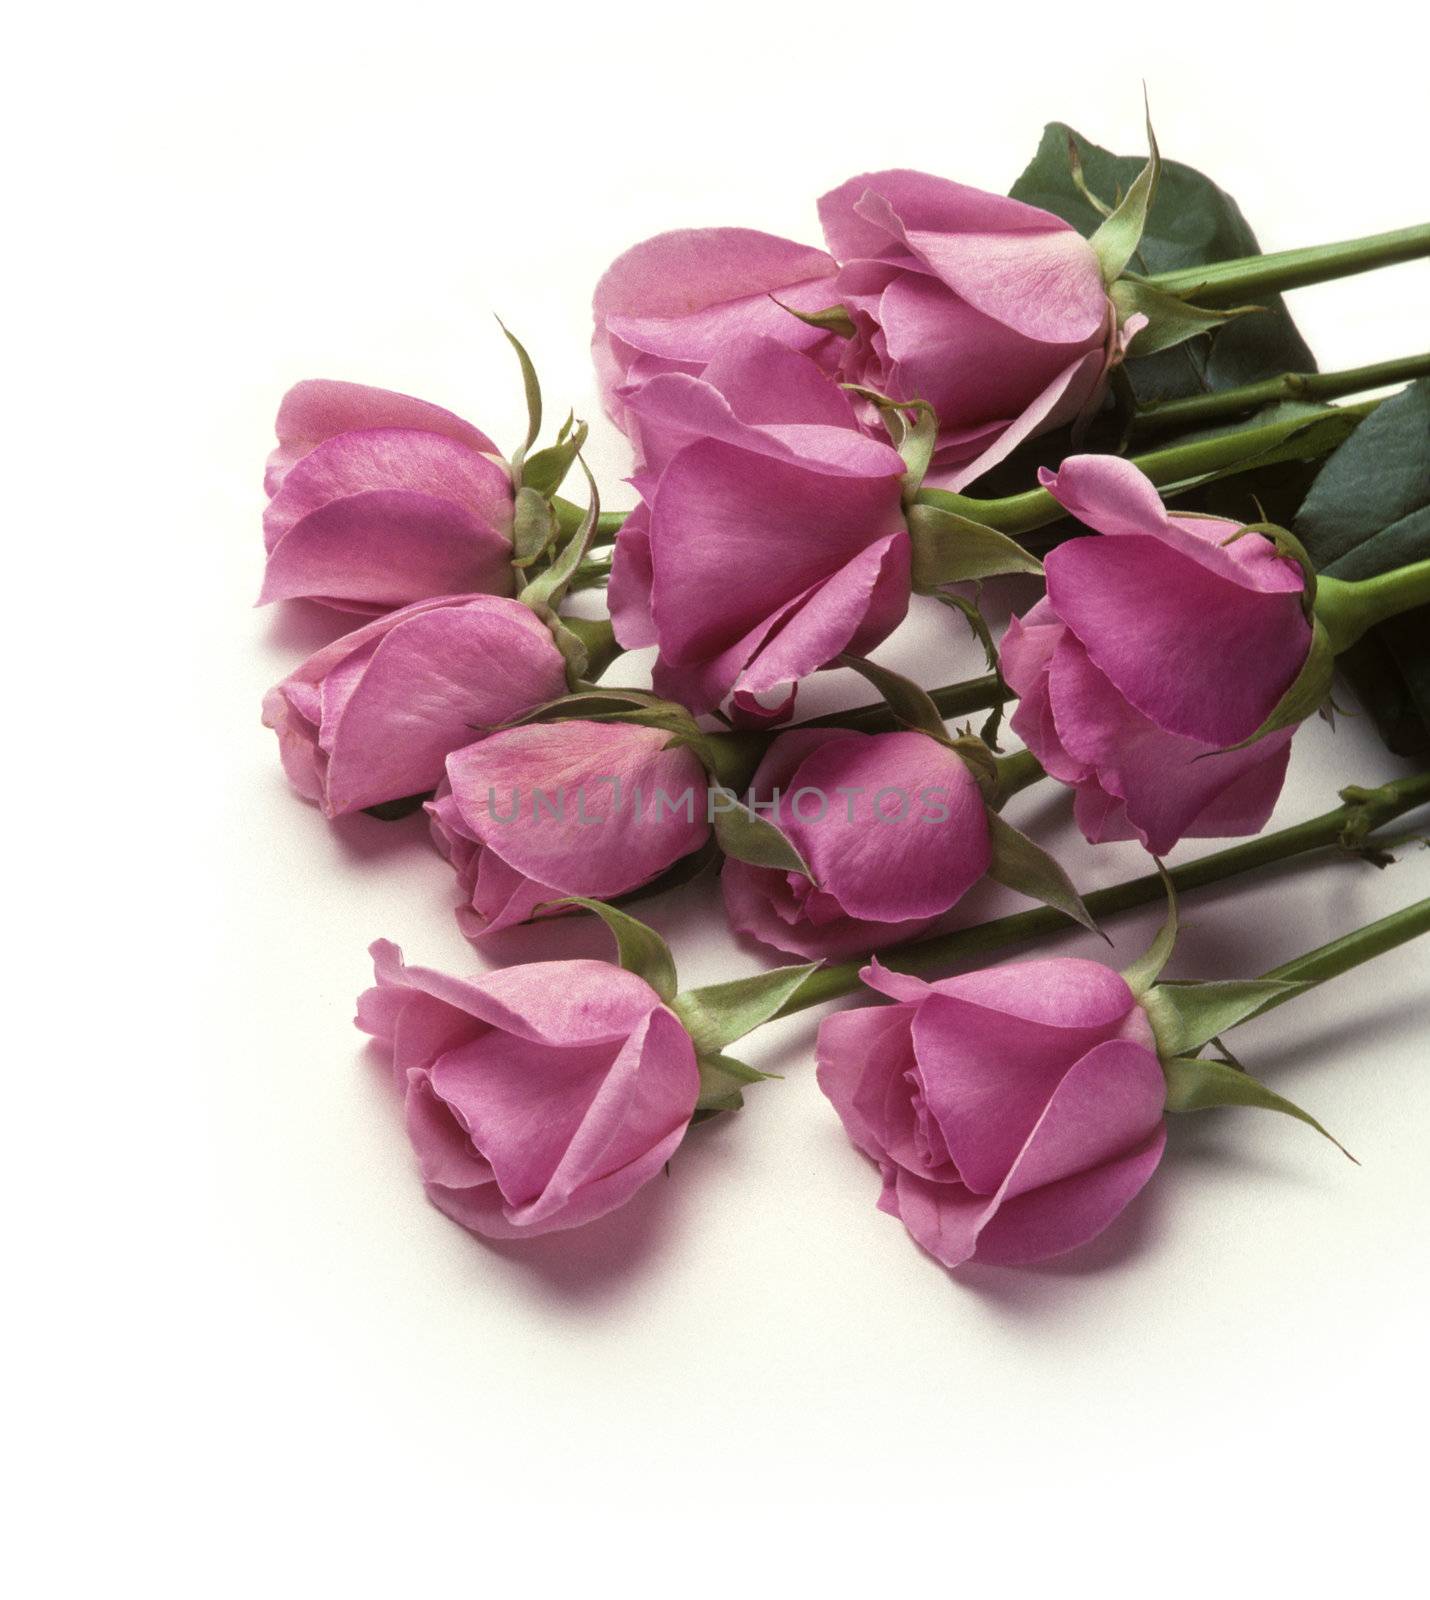 Bunch of pink roses laying on white background